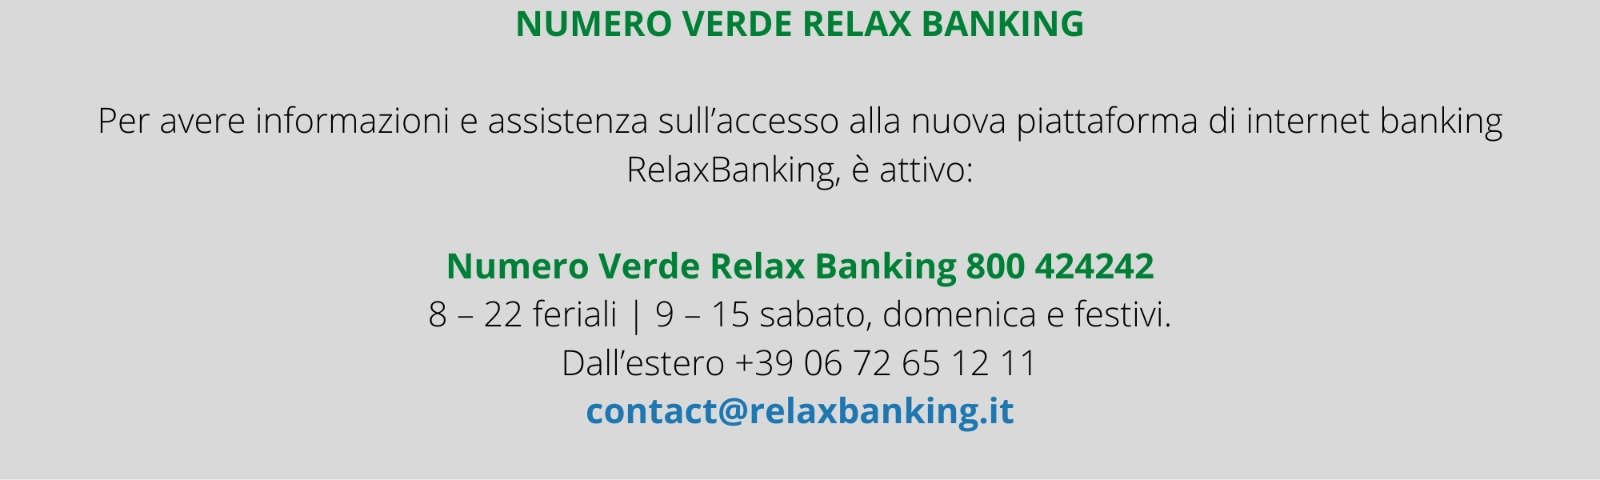 Home banking RelaxBanking